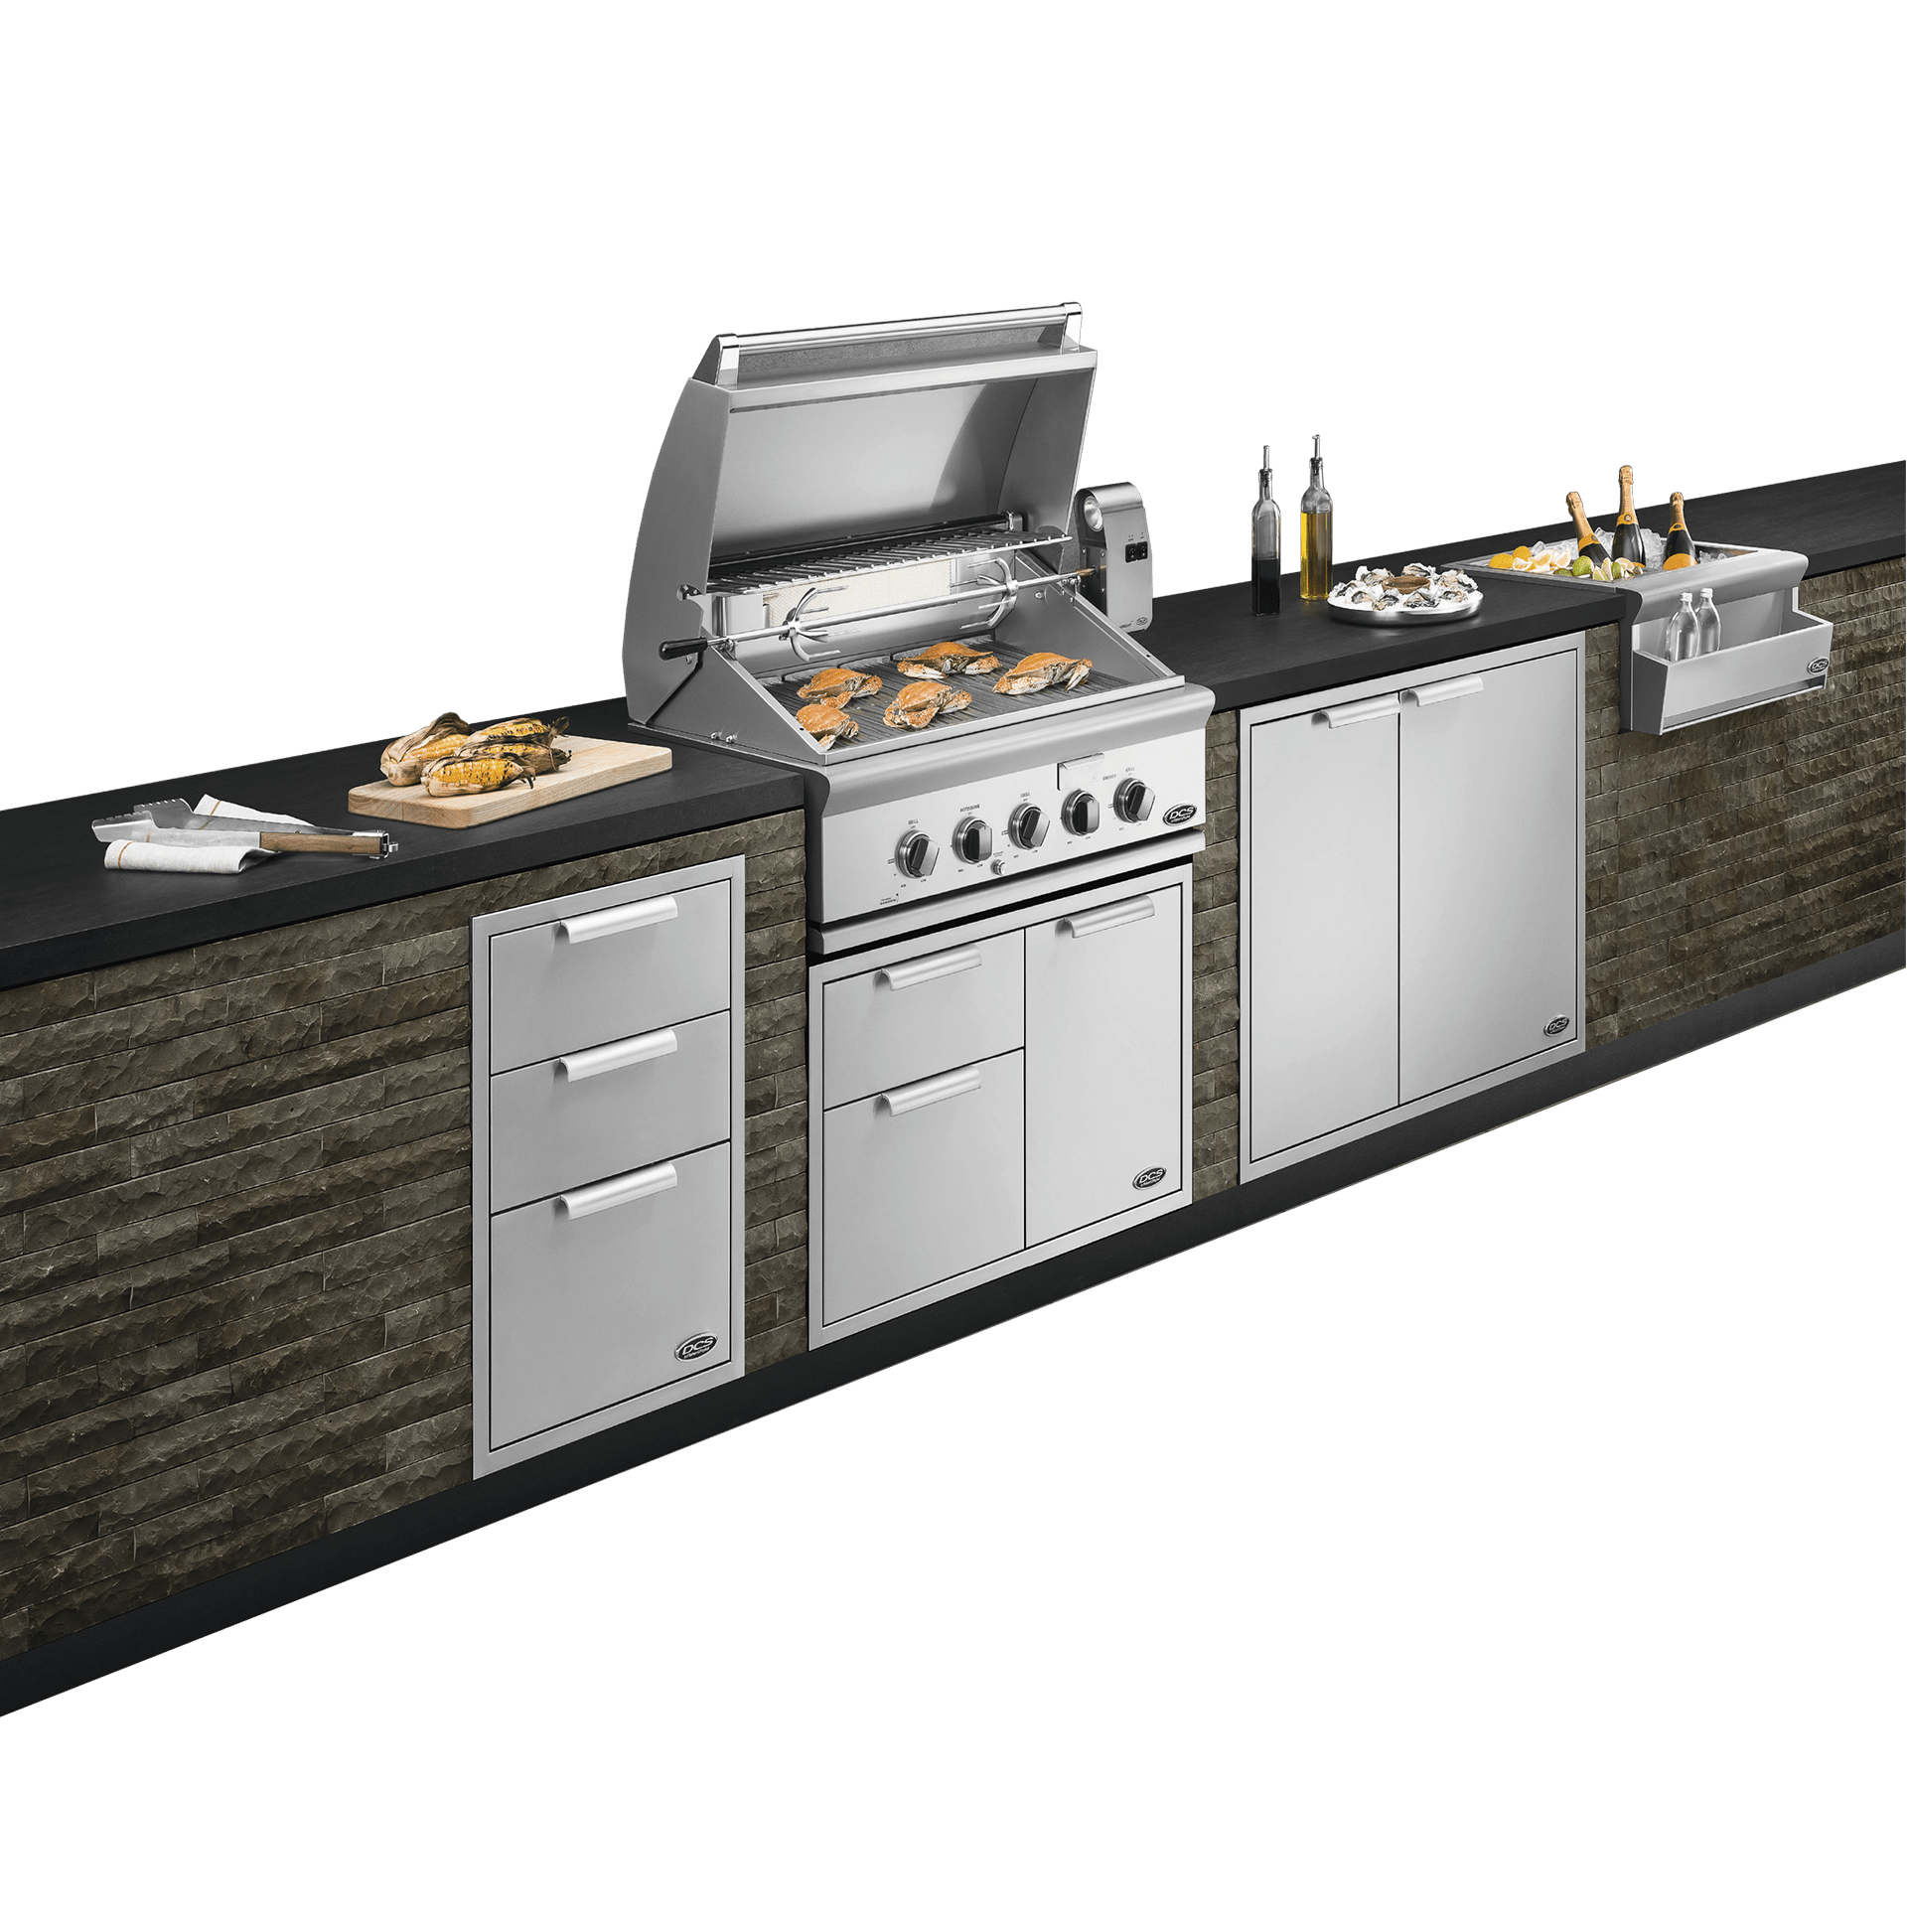 DCS Grills Outdoor Kitchens for Sale